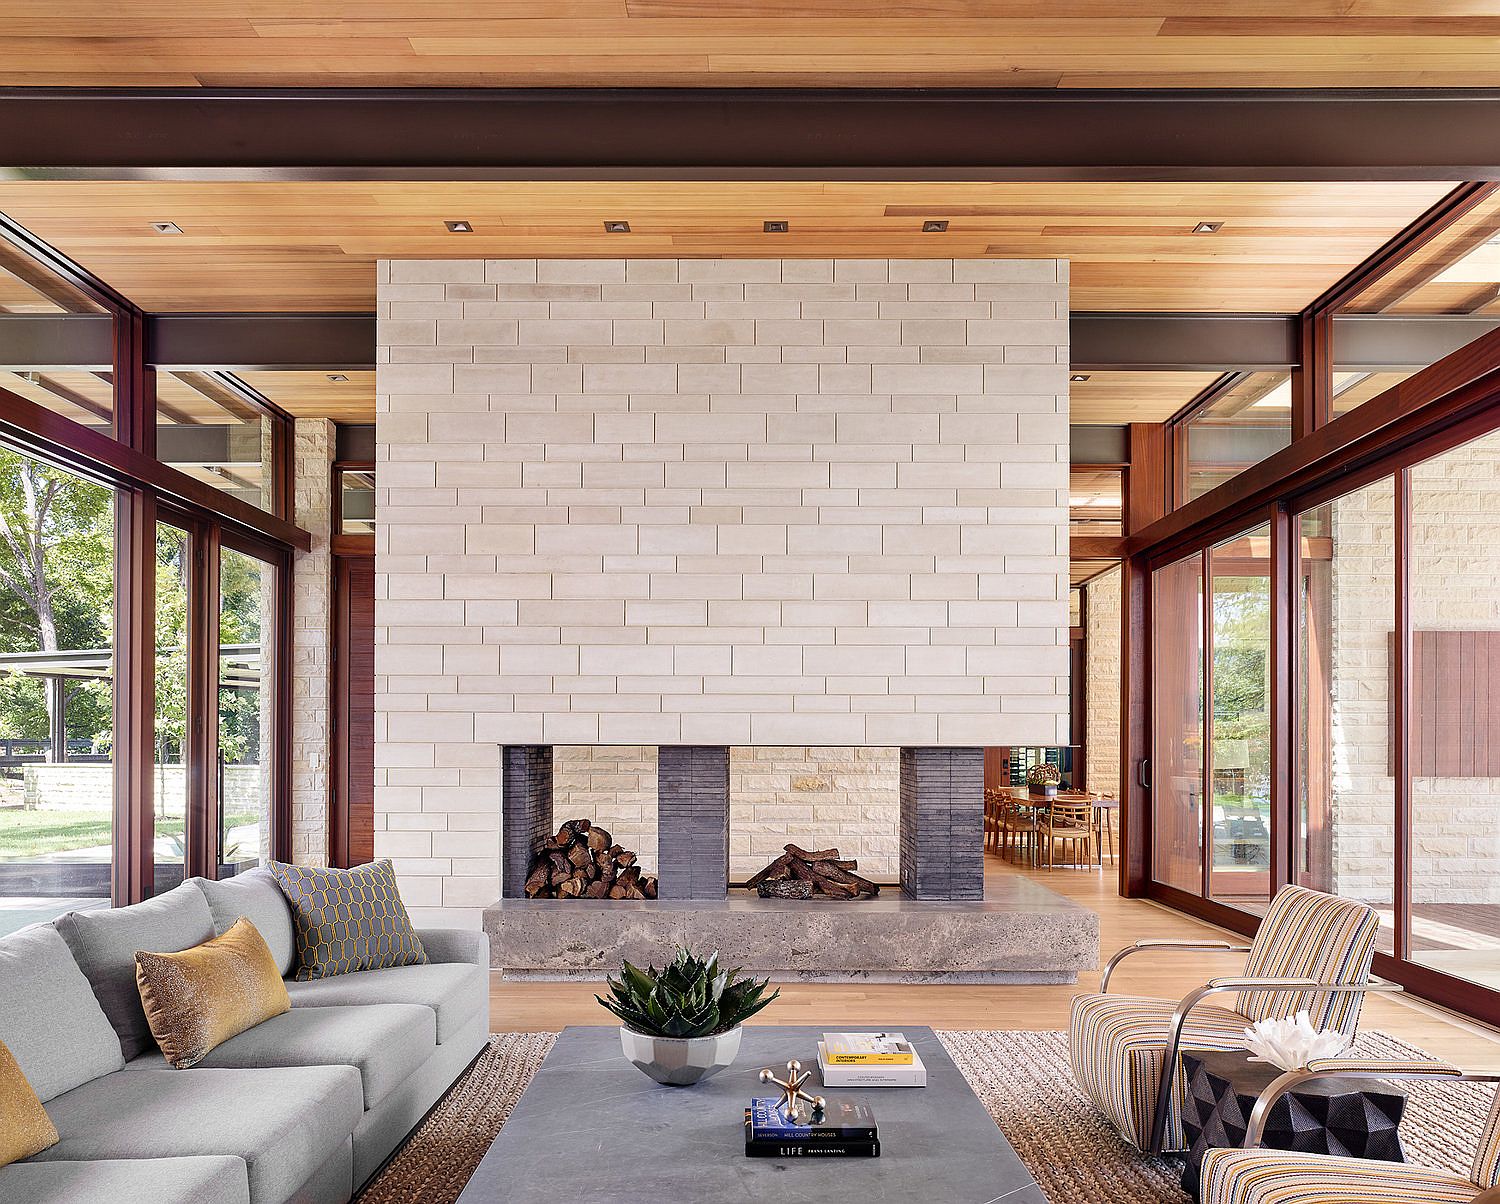 Central-fireplace-of-the-house-with-a-wall-that-adds-gray